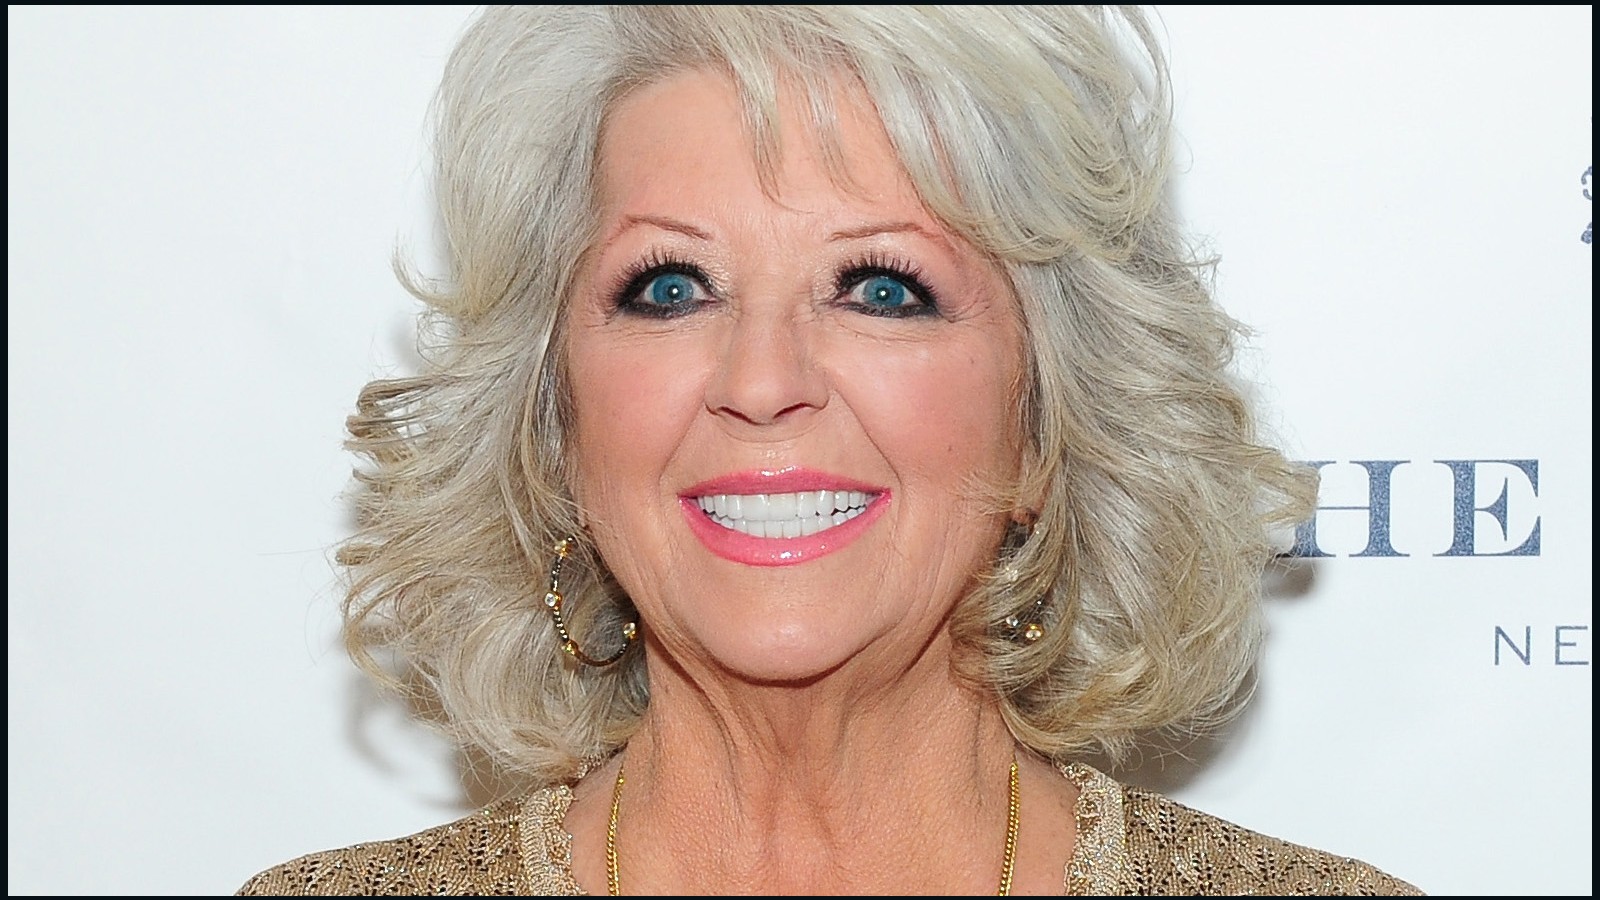 Hayes Grier On Dwts Reports Say Paula Deen Joining Cnn